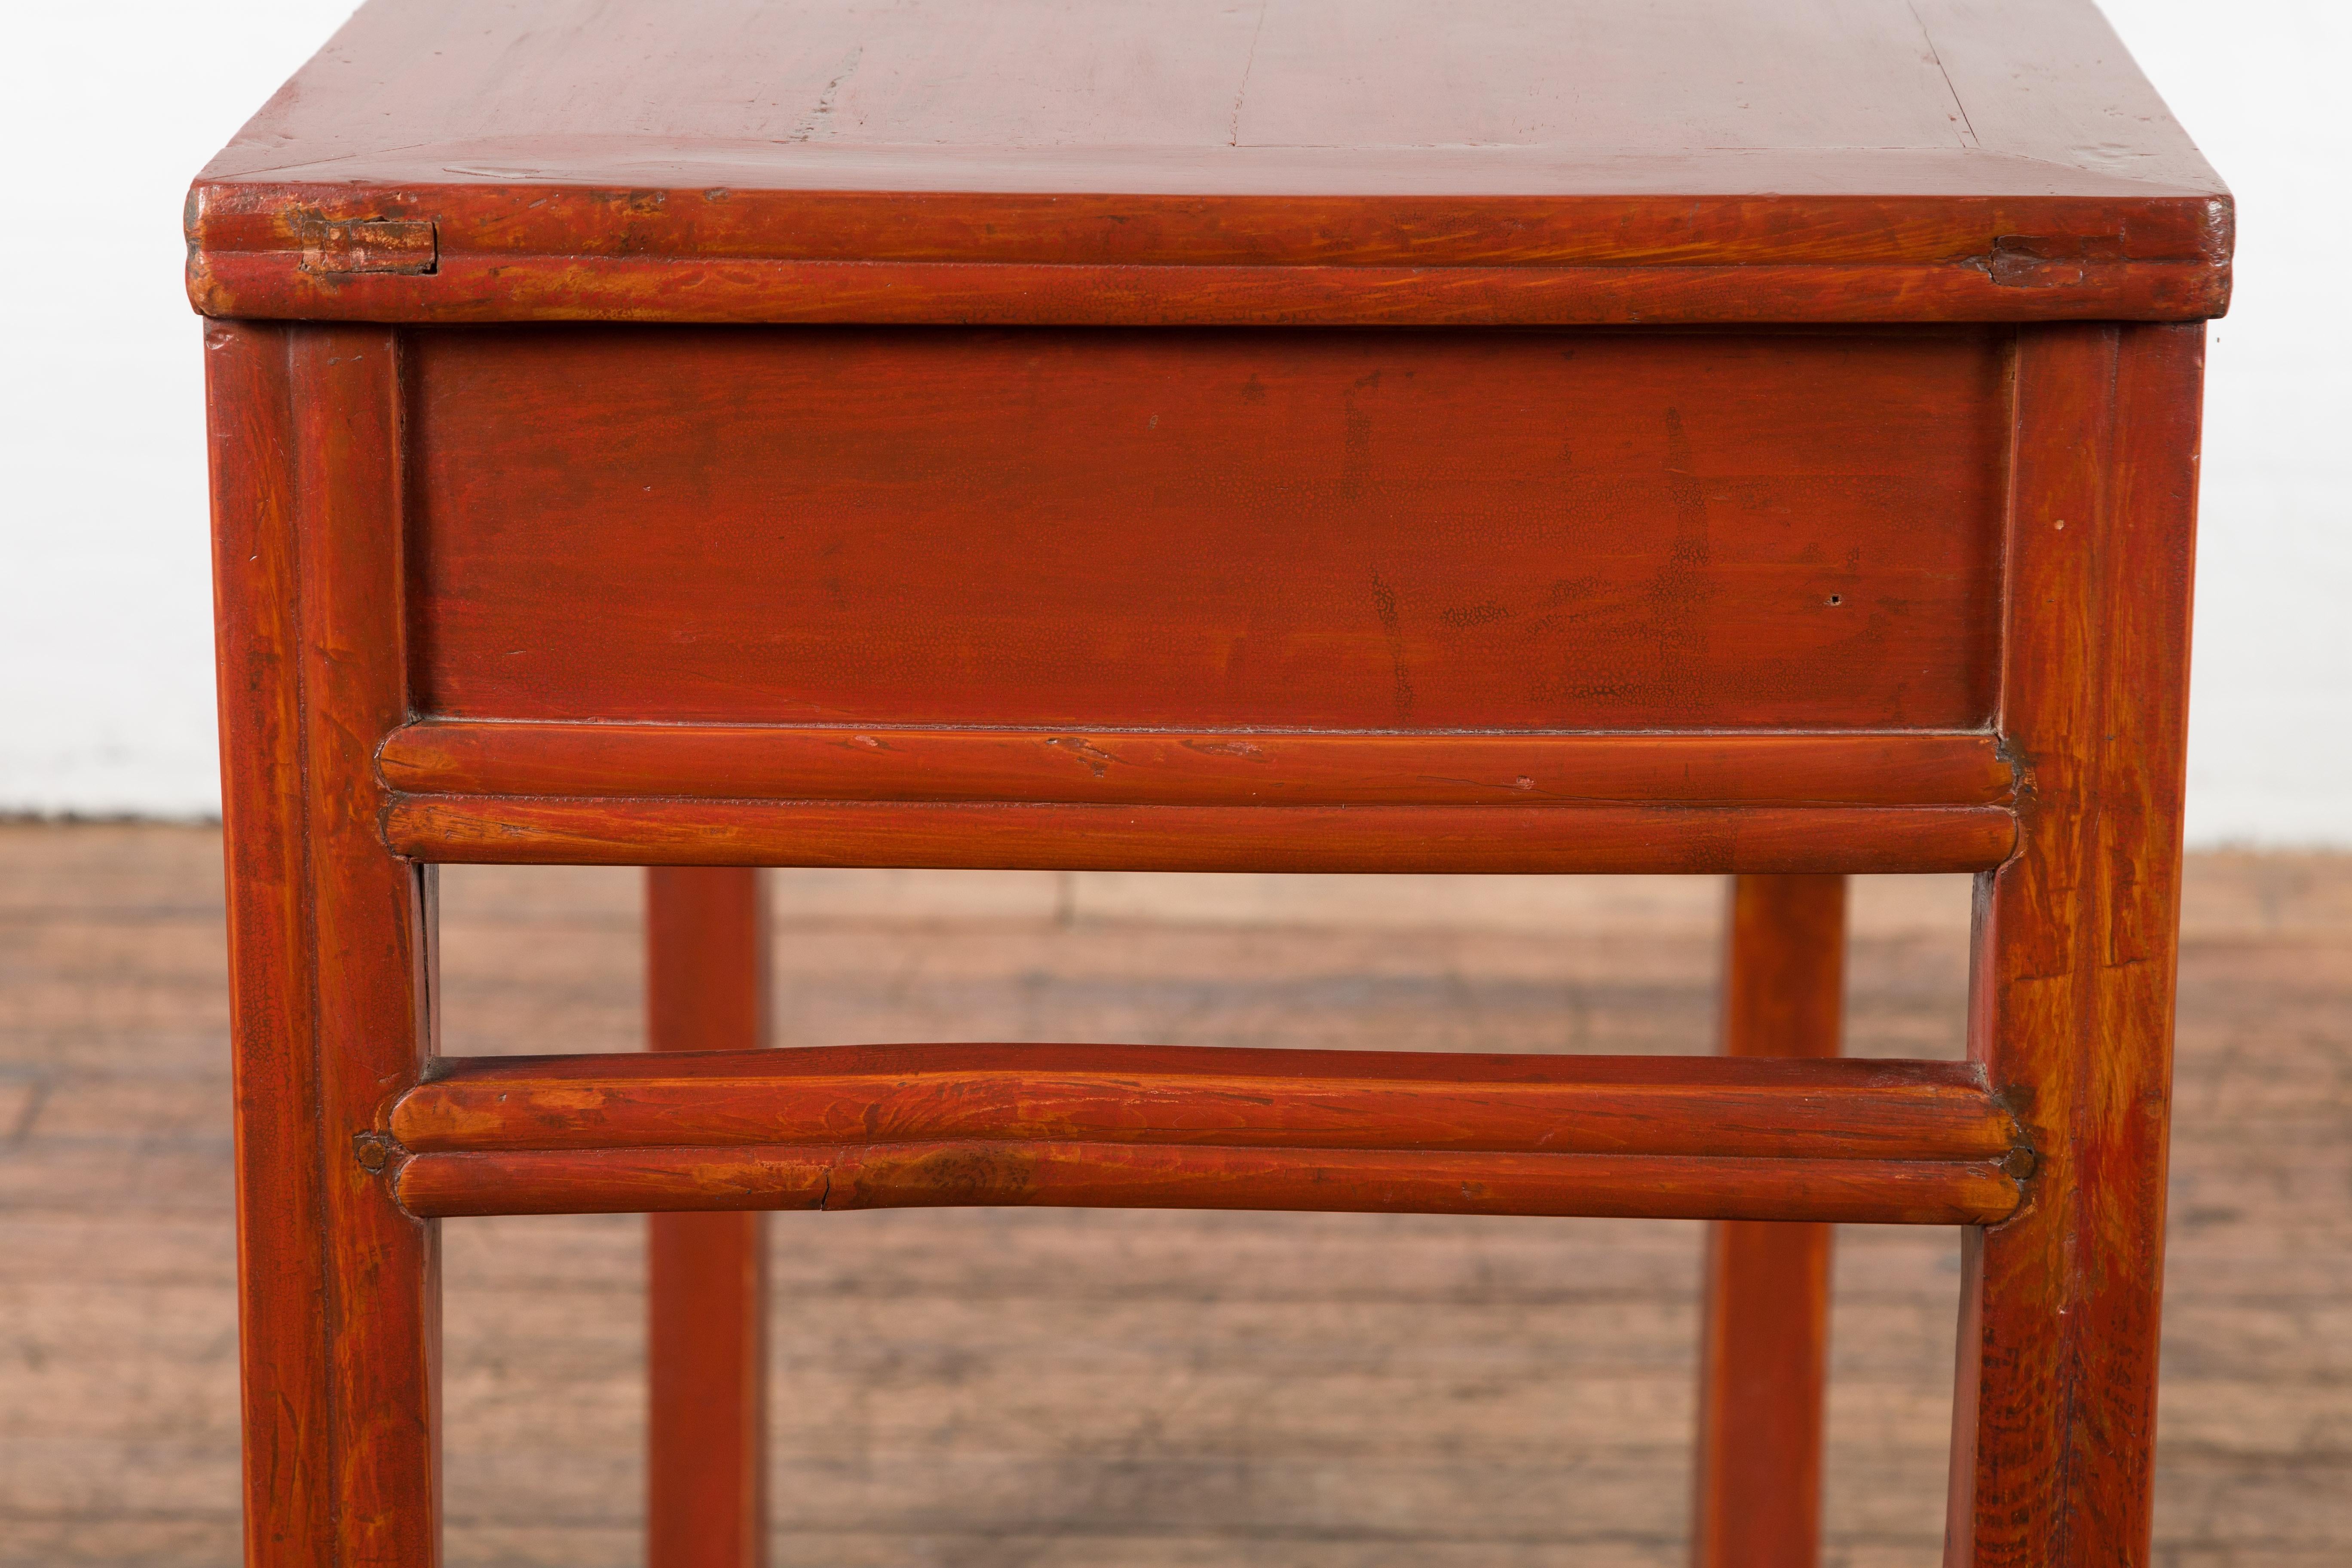 Chinese Qing Dynasty 19th Century Red Orange Lacquered Table with Three Drawers For Sale 13